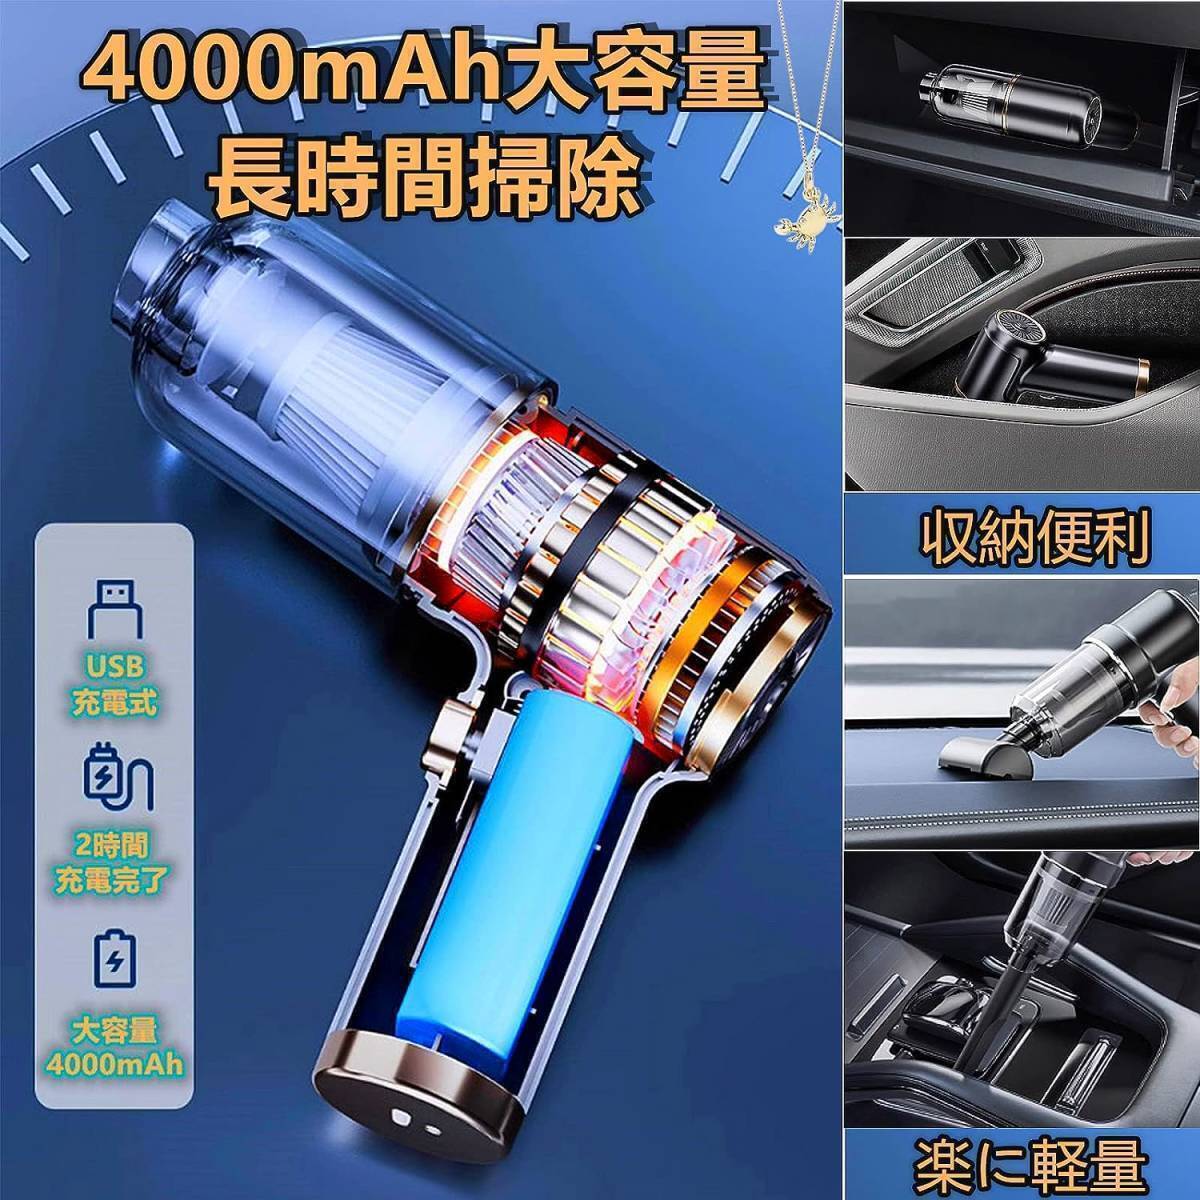  free shipping Aeetit electric small size powerful USB rechargeable handy cleaner cordless type powerful absorption light weight compact in car cleaning pet new goods unused 